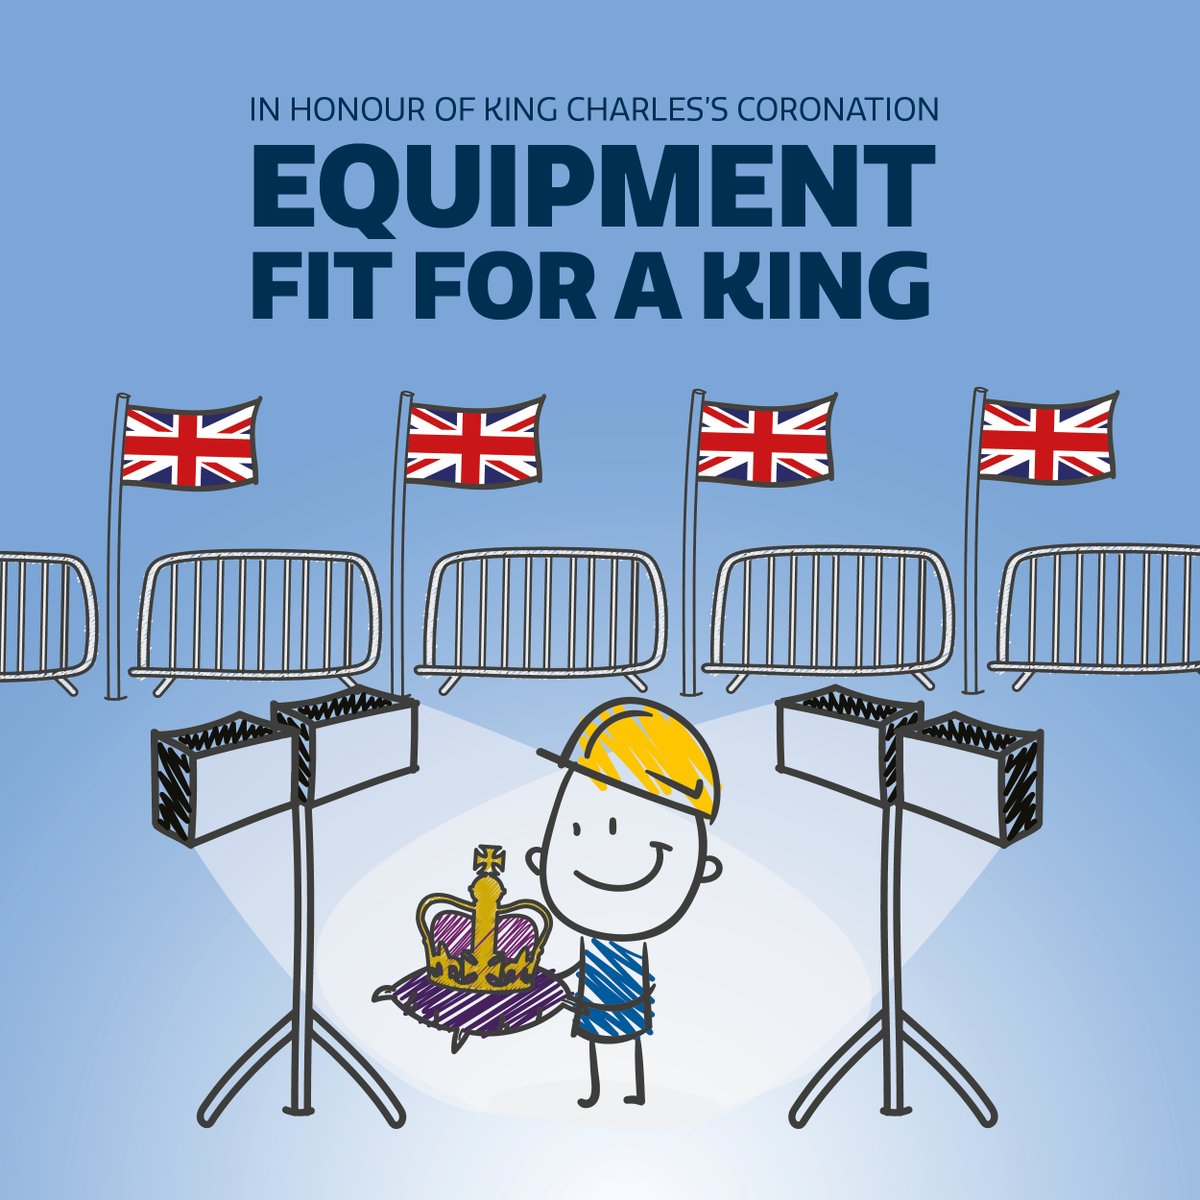 At #TheHireman, we supply #tools and #equipment fit for a king 👑 As the Coronation of King Charles III approaches, we're rounding up some of our treasured products made by #British brands 💎 Check them out in all their glory 👀: ow.ly/1q2r50Oe0w8